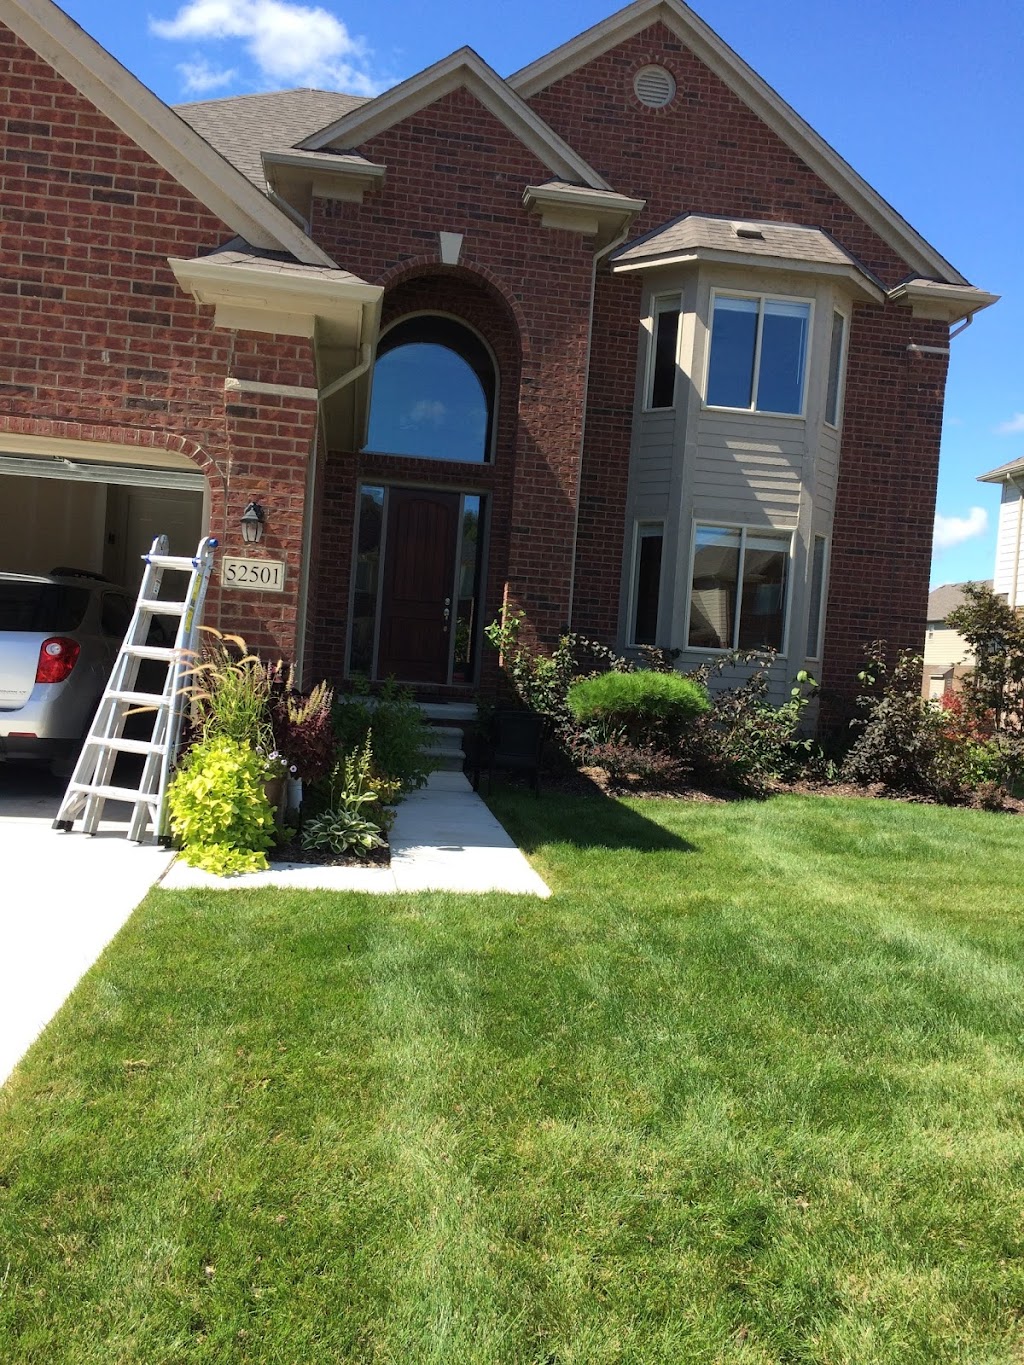 Paradigm Cleaning Solutions Inc. | 45518 Birchcrest St, Shelby Township, MI 48317 | Phone: (586) 604-7340